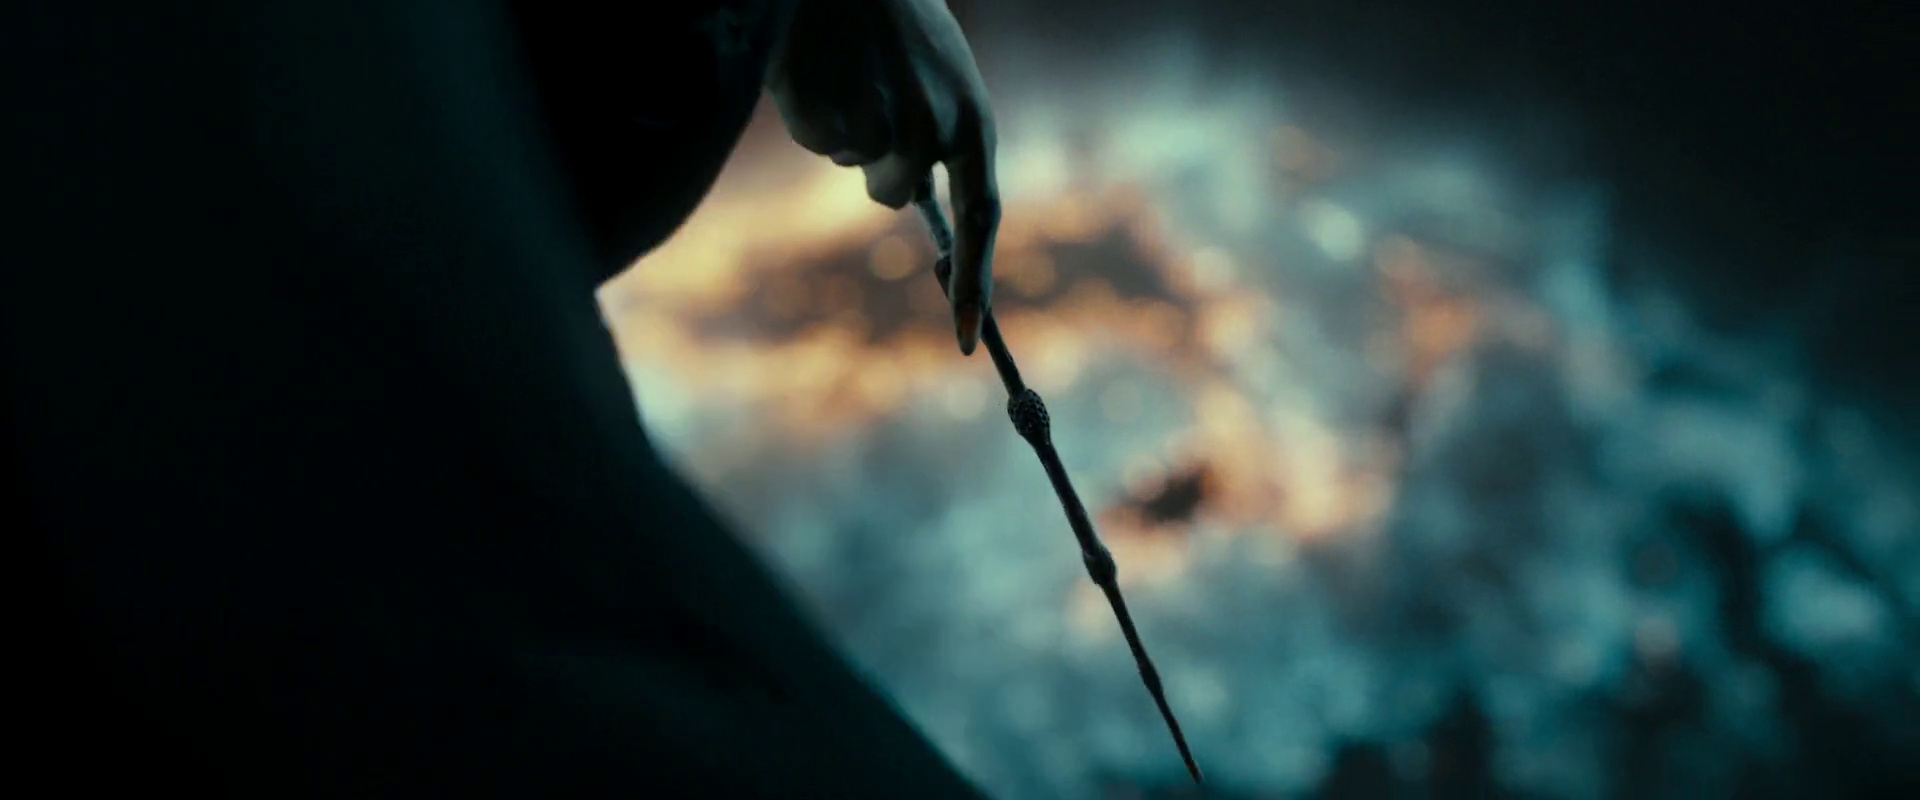 The Elder Wand in Harry Potter and the Deathly Hallows Part 2